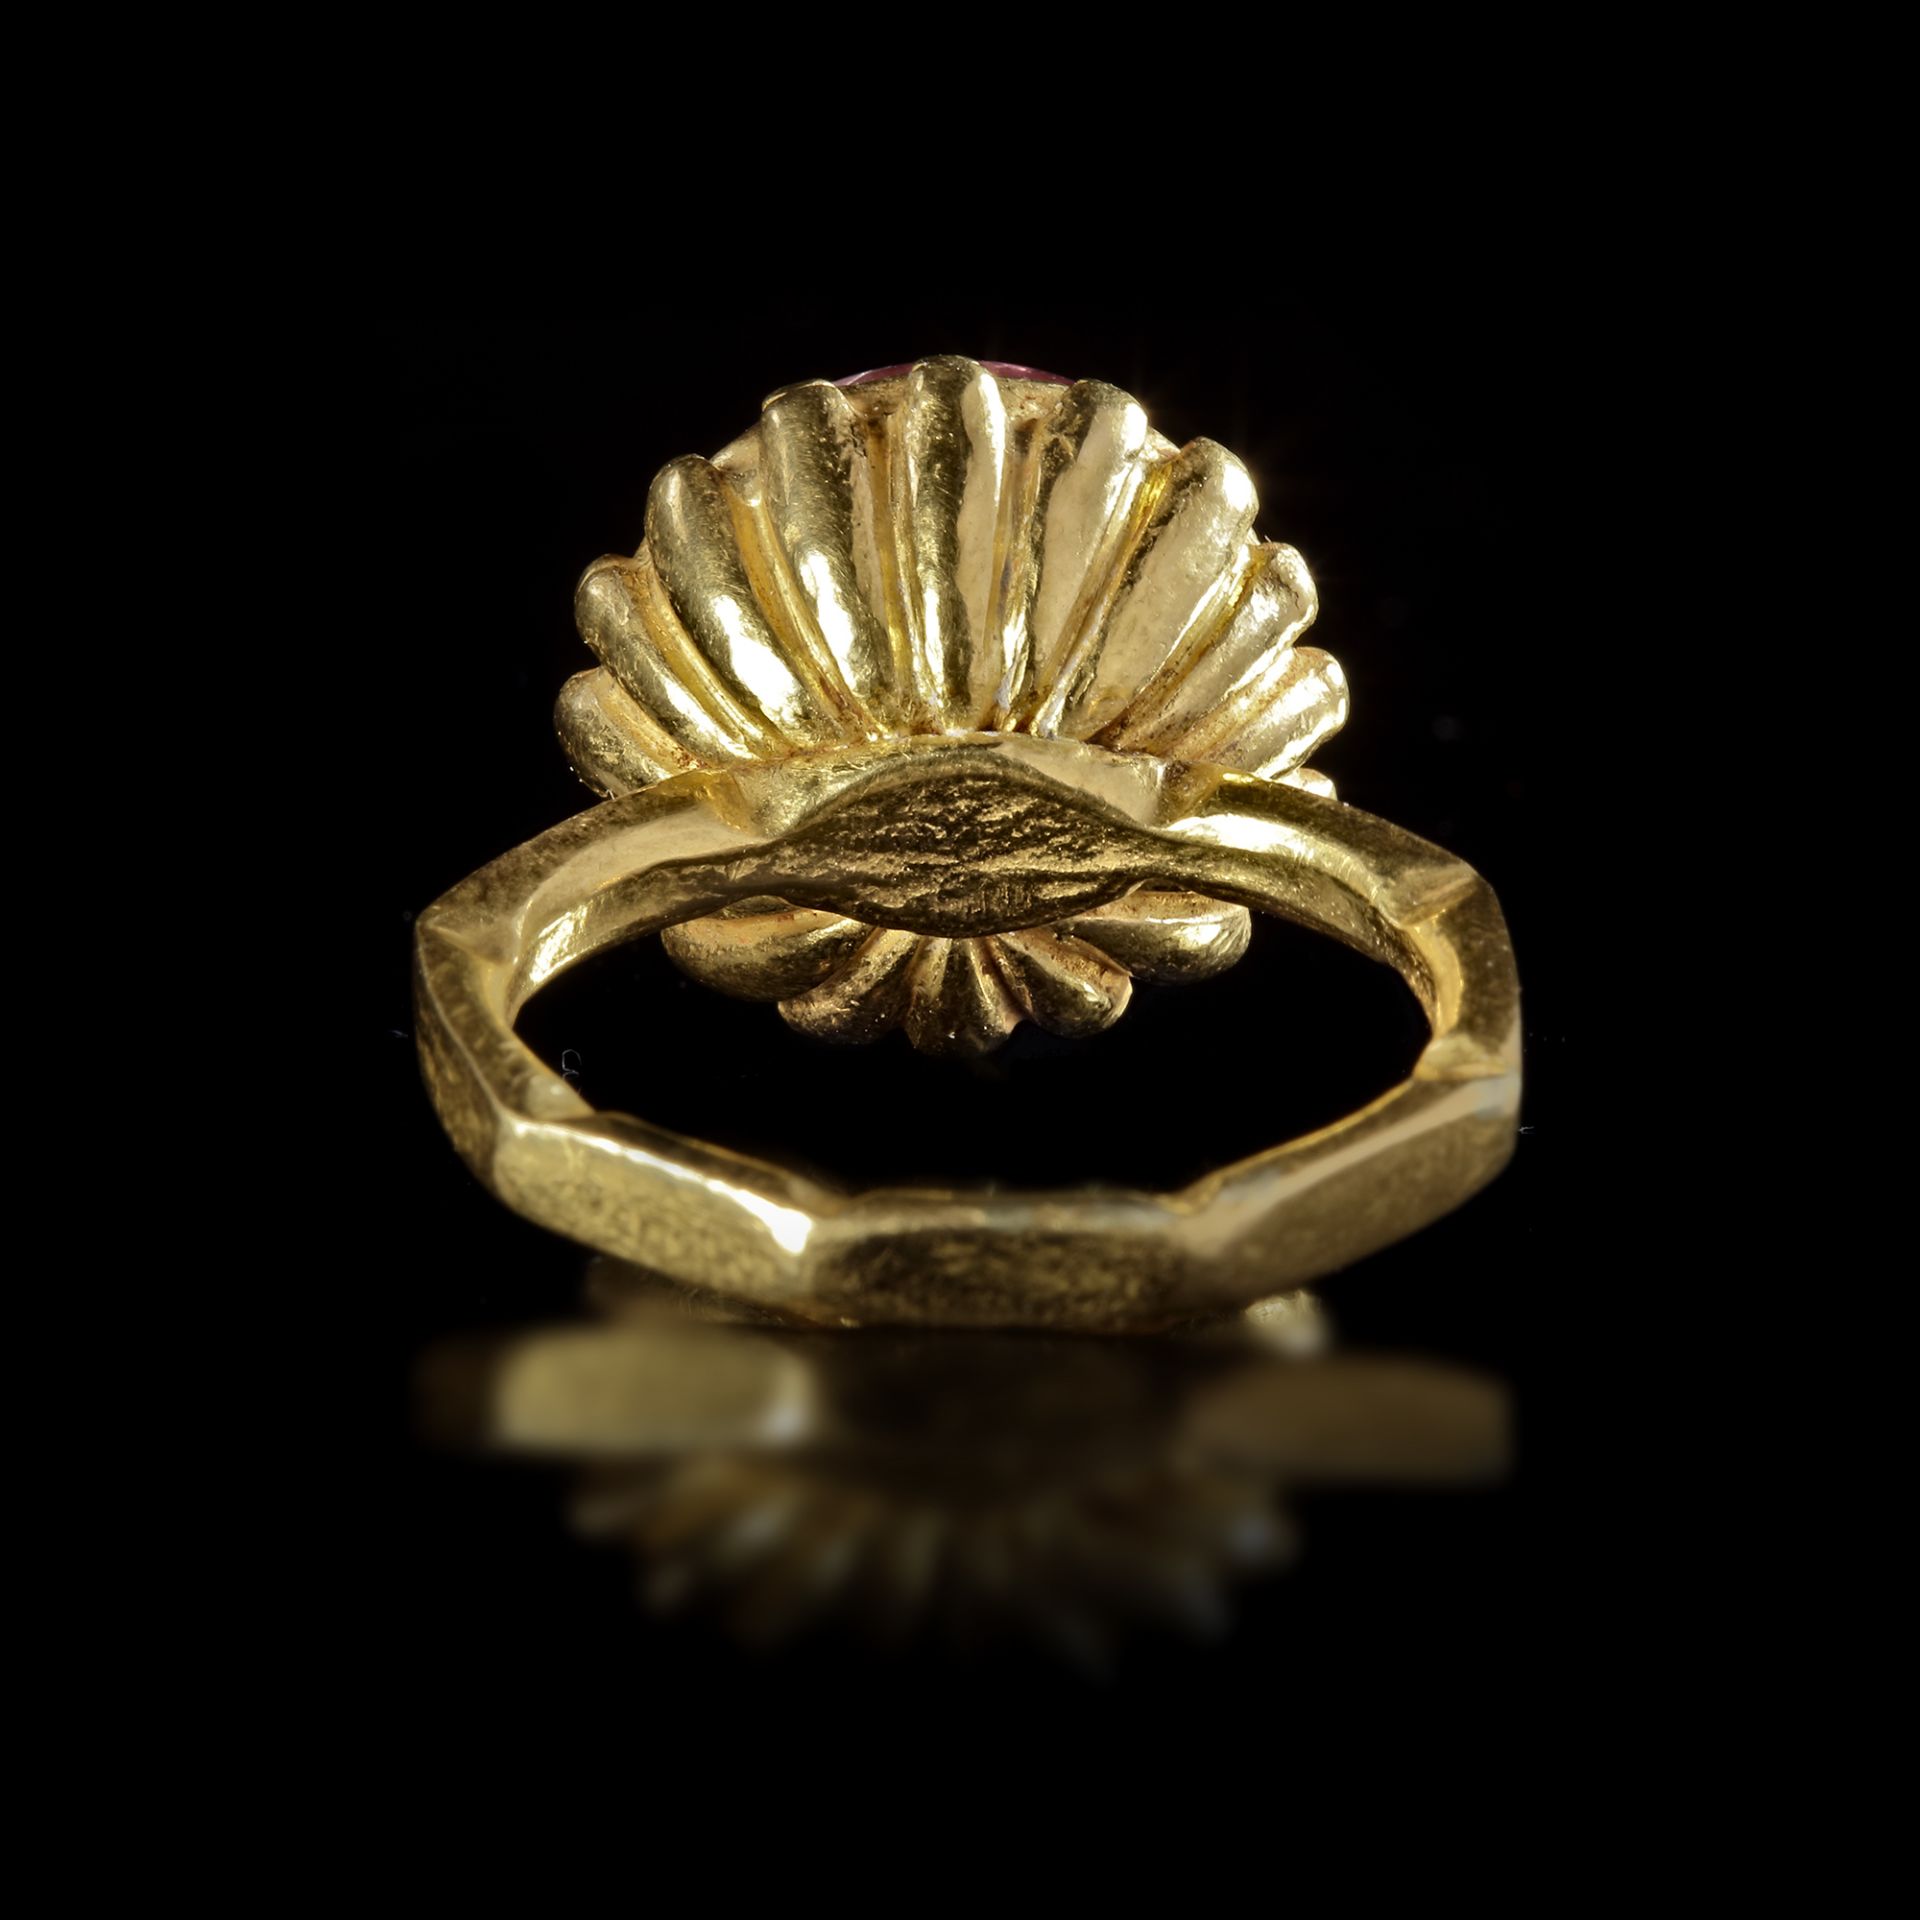 A LARGE BYZANTINE GOLD RING OF THE 'BASKET' TYPE, 5TH/6TH CENTURY AD - Image 3 of 3